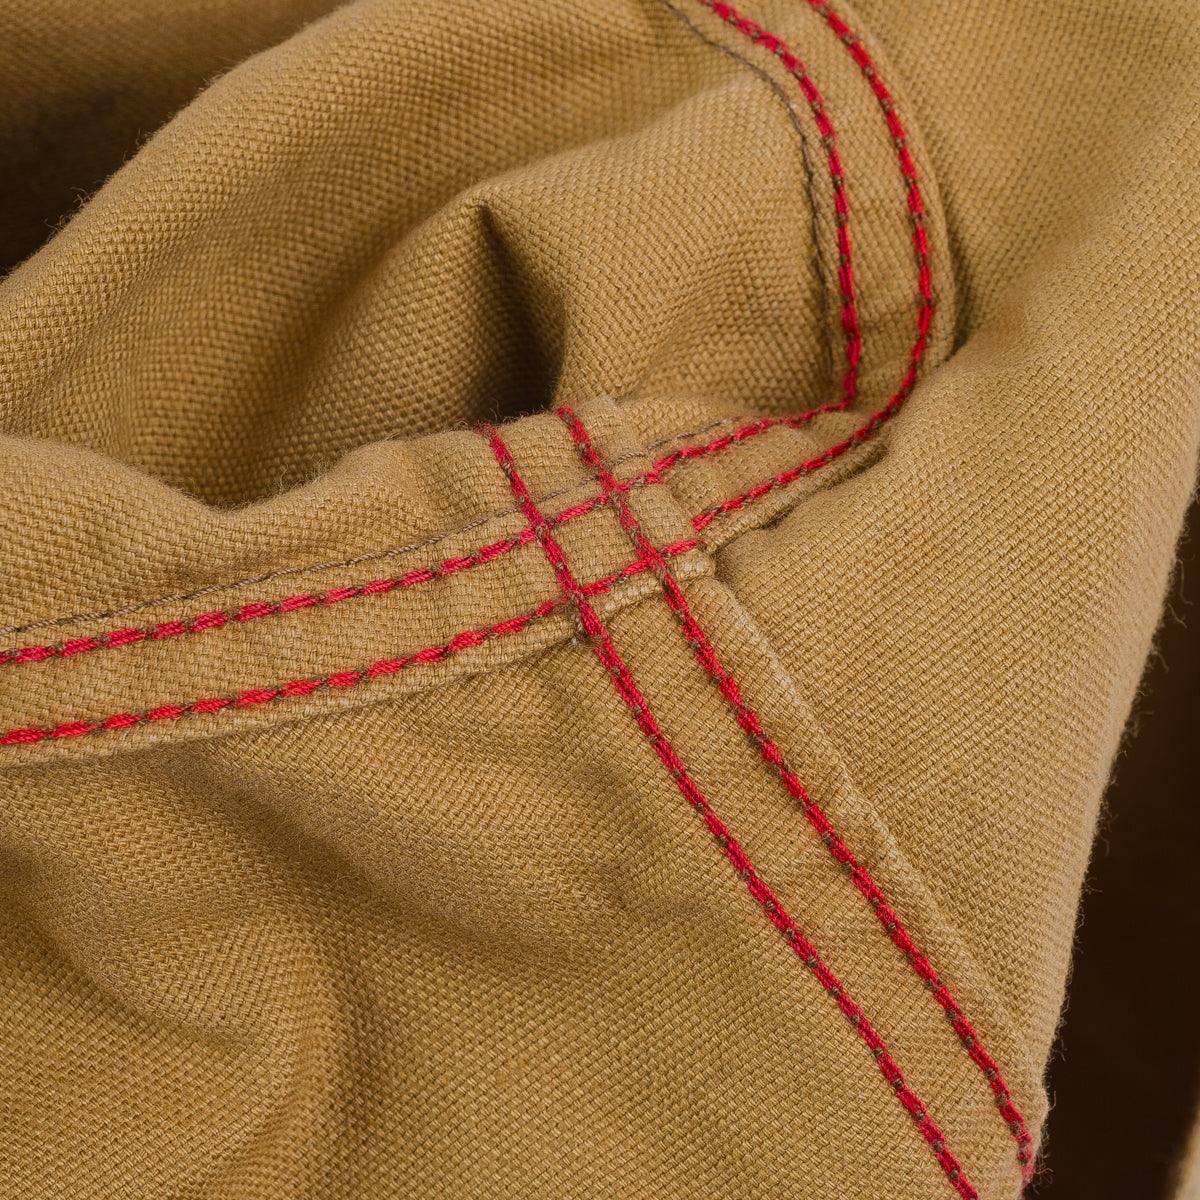 Image showing the IHJ-134-MUS - 9oz Paraffin Coated OX Type II Jacket - Mustard which is a Jackets described by the following info SS24 and sold on the IRON HEART GERMANY online store